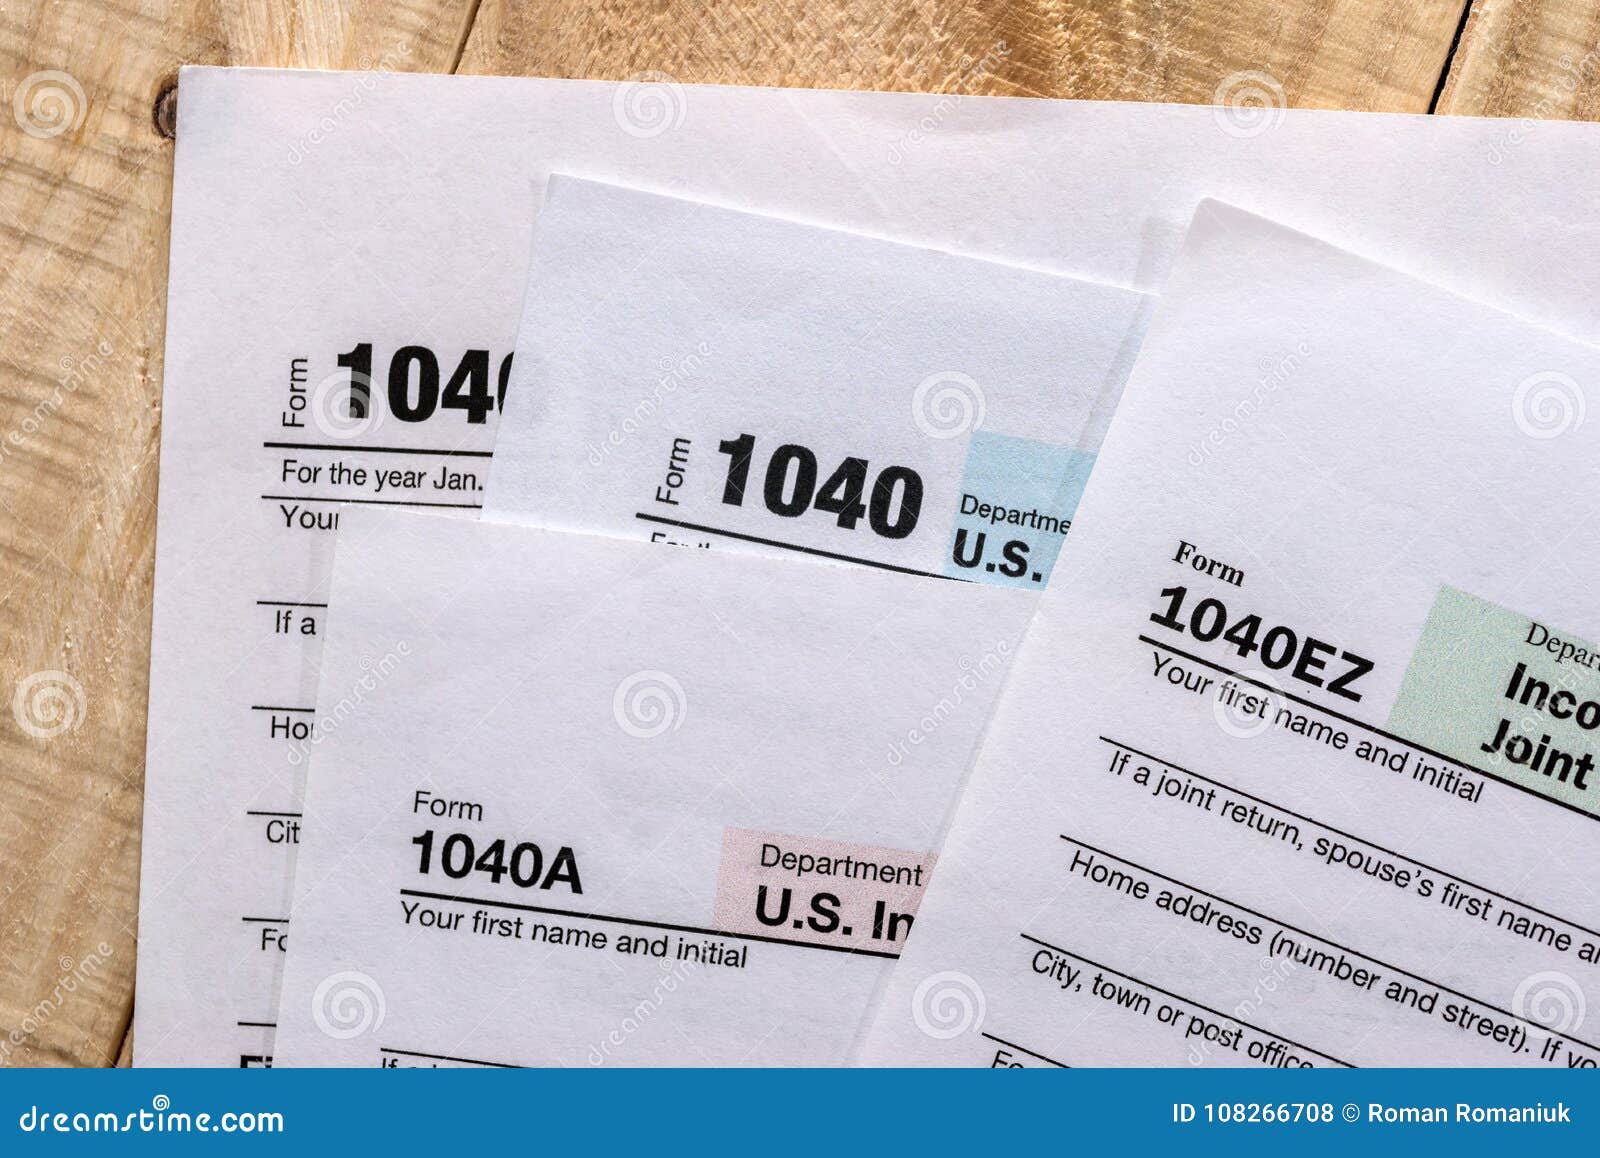 tax-return-money-form-editorial-stock-photo-image-of-paper-108266708